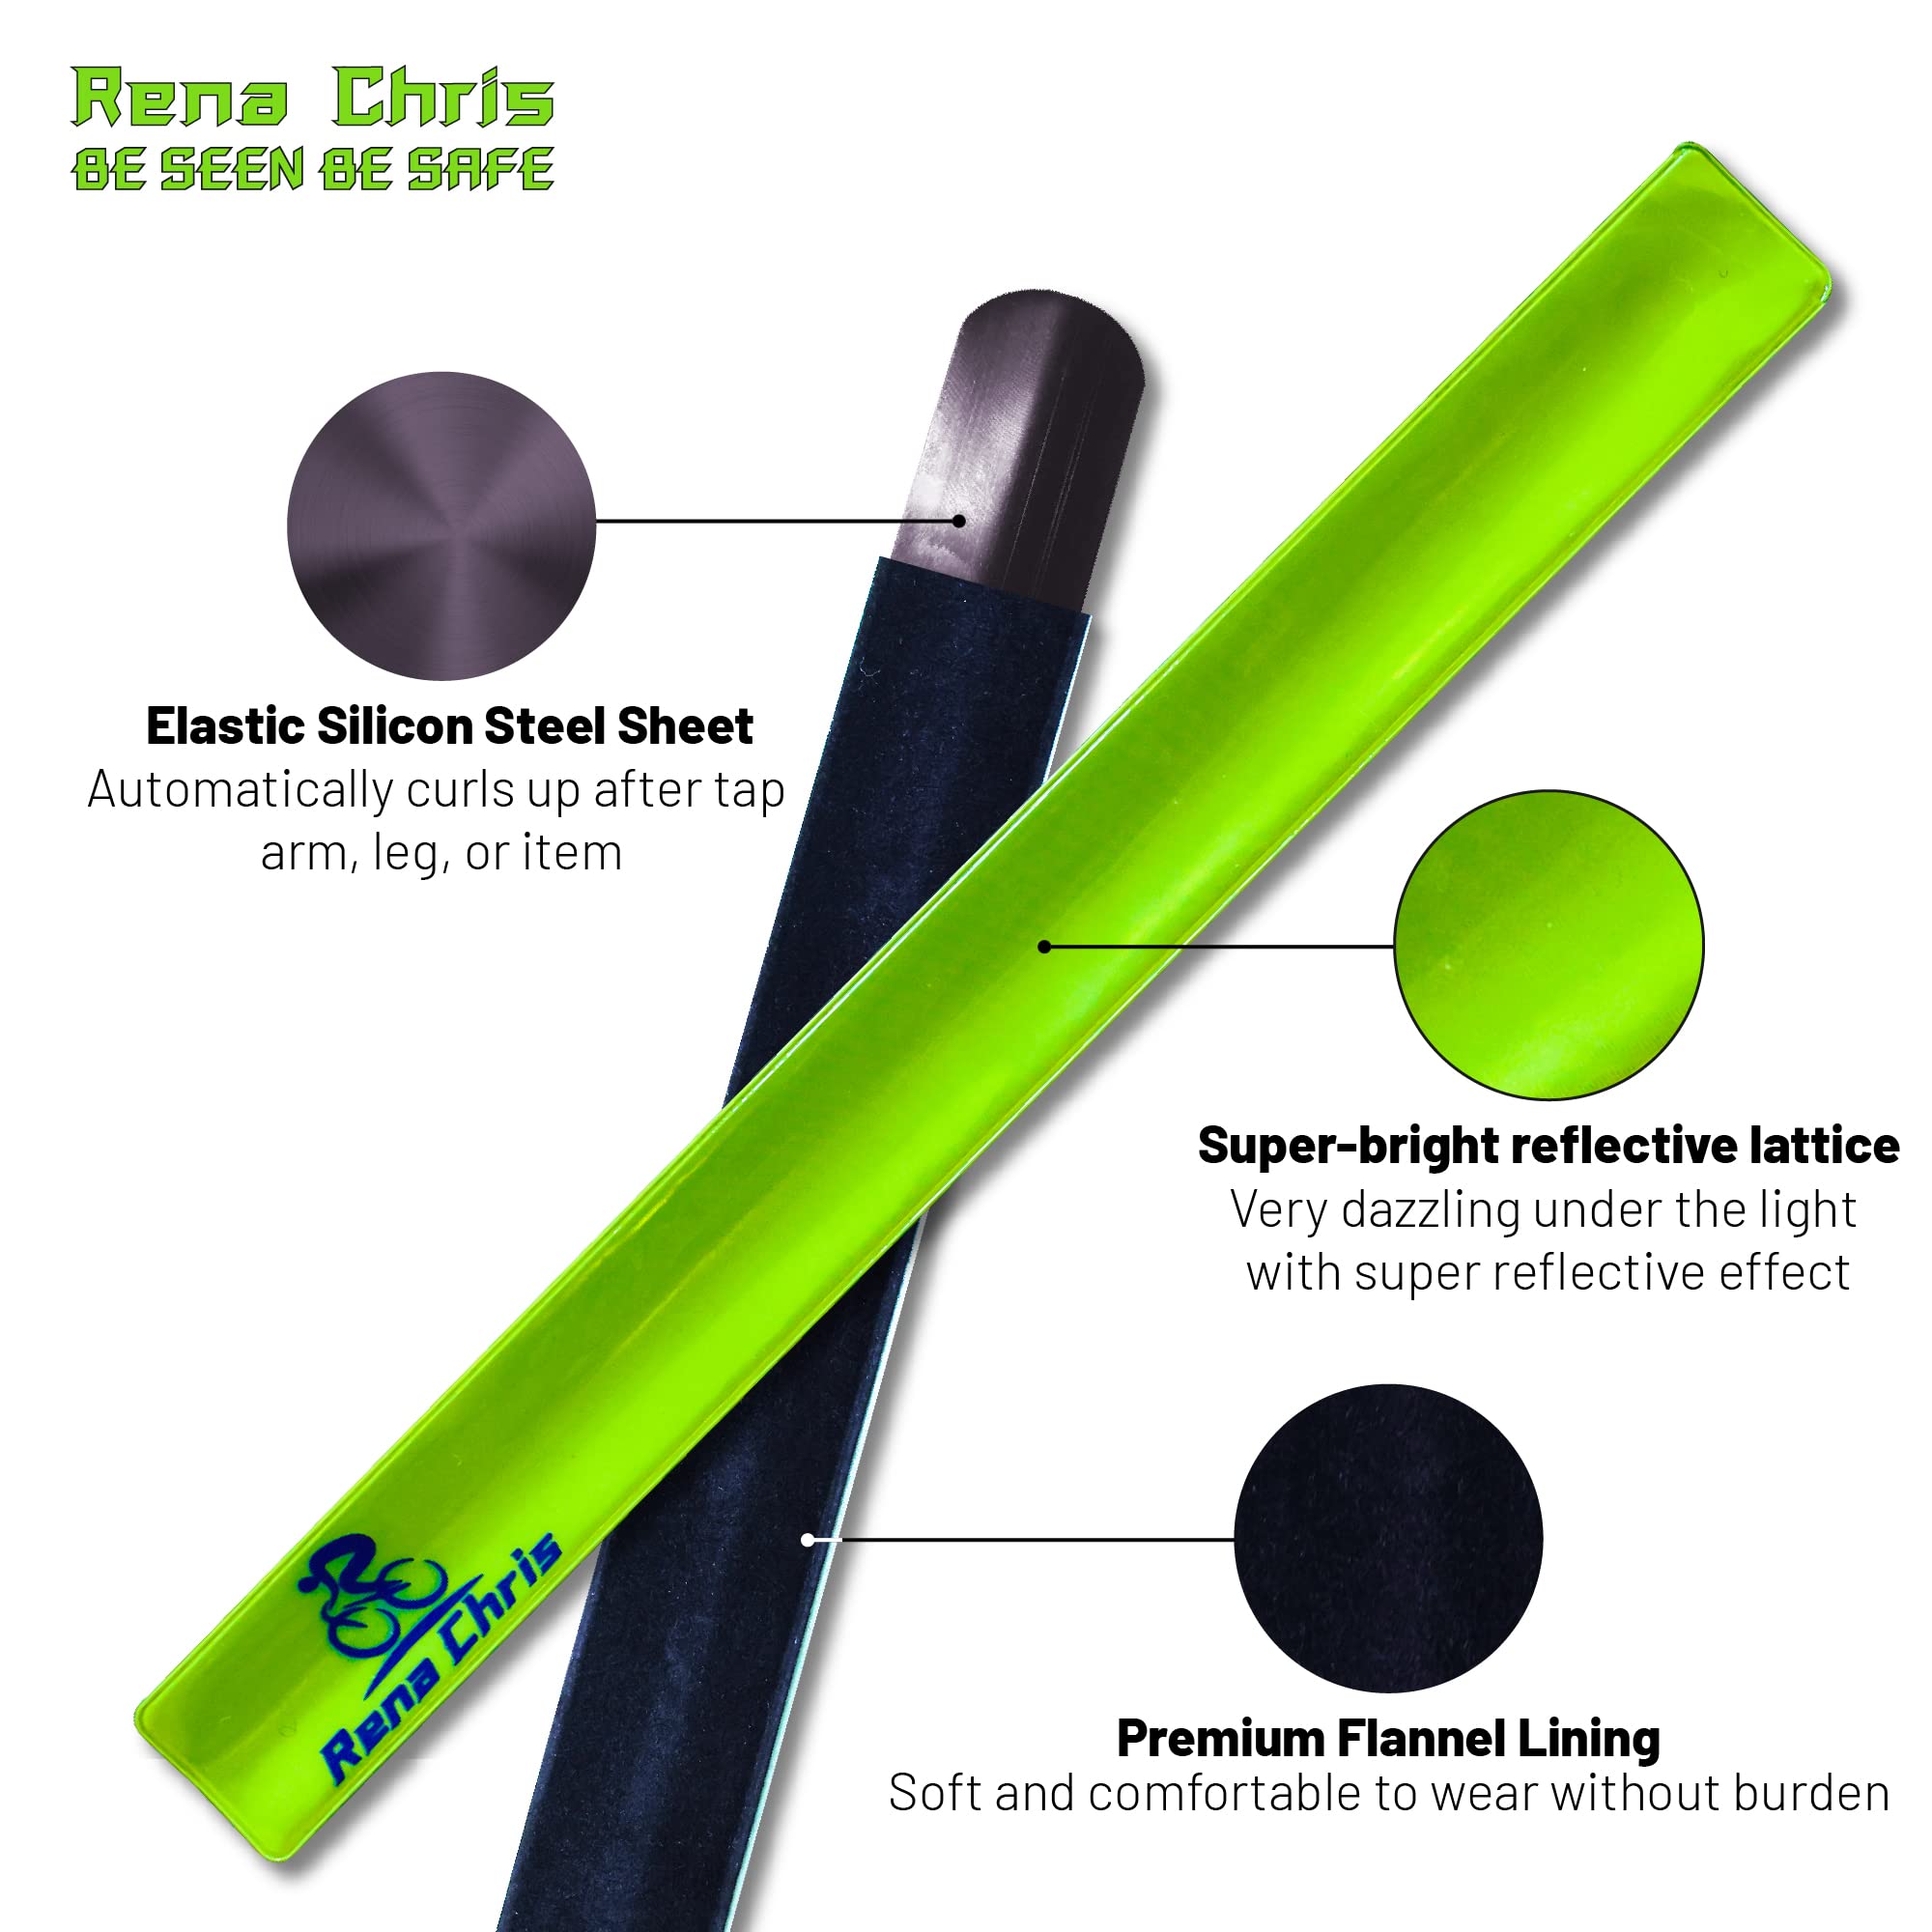 Reflective Bands for Wrist, Arm, Ankle, Leg. High Visibility Reflective Gear for Night Walking, Cycling and Running. Safety Reflector Tape Straps. Very Large Reflective Surface Area